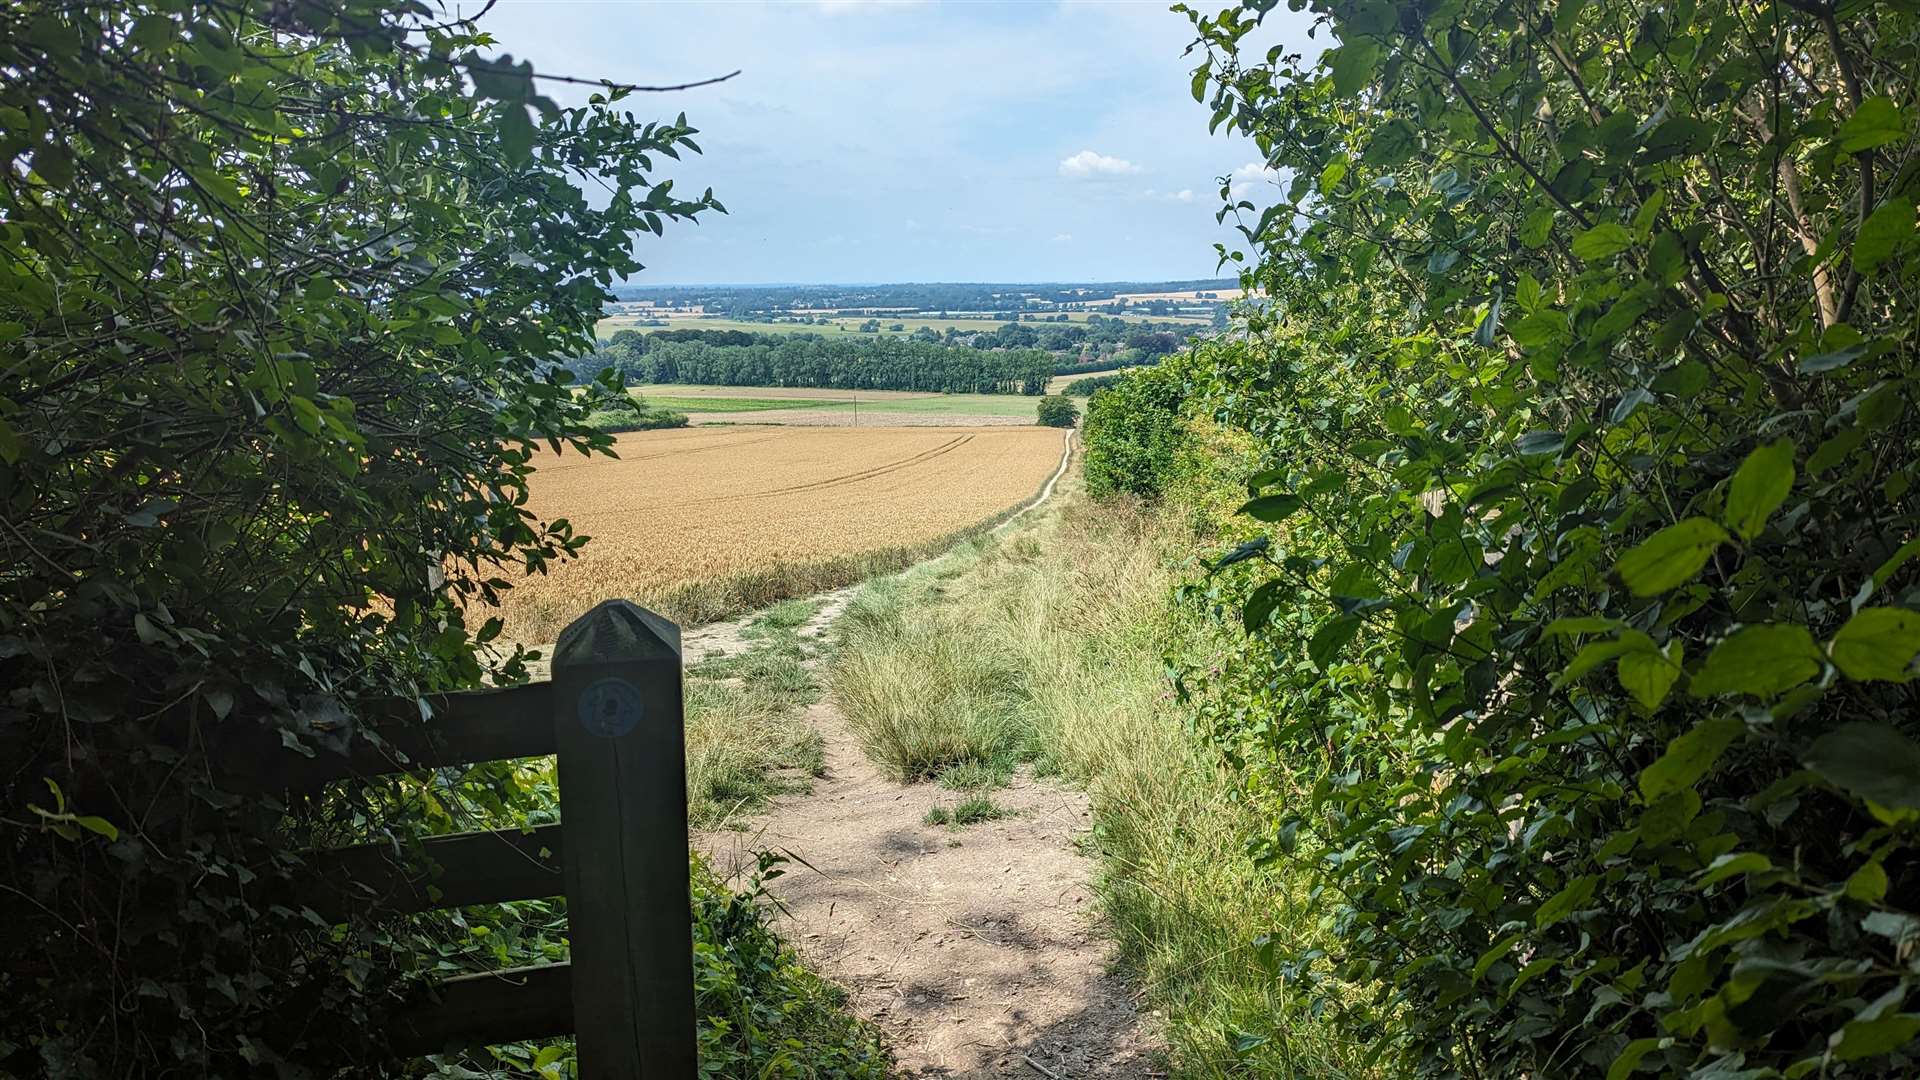 The footpath leads back down from the Downs towards Wye